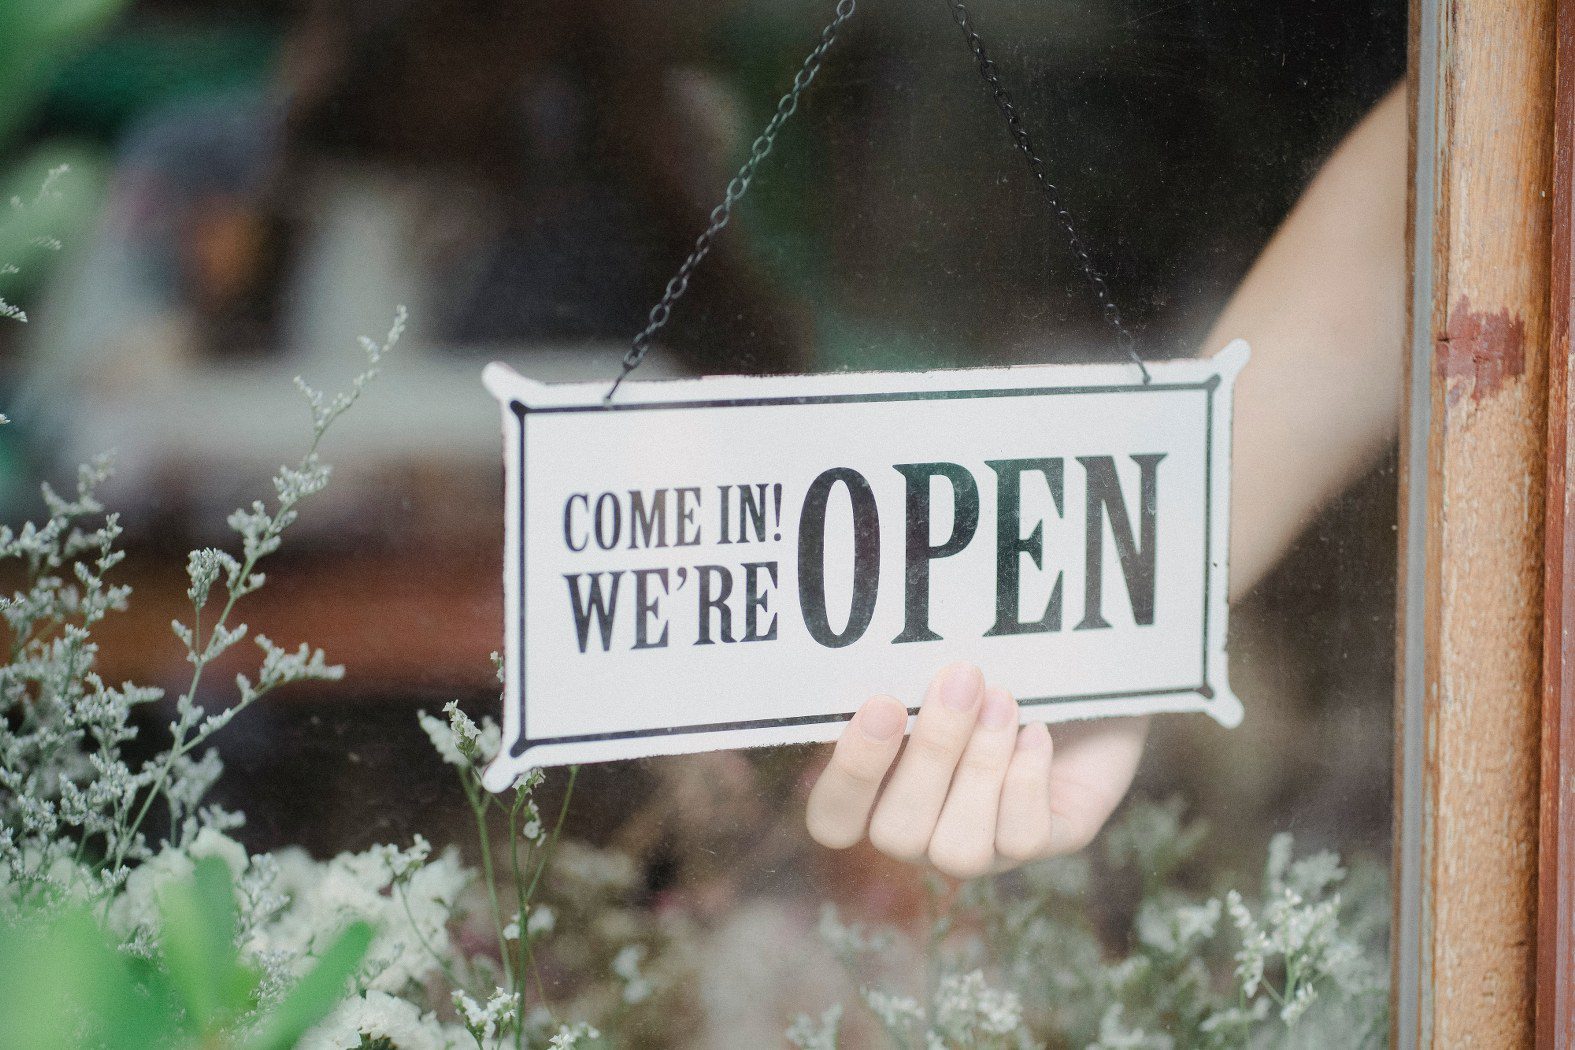 image of a we're open sign indicating 24 hour customer support